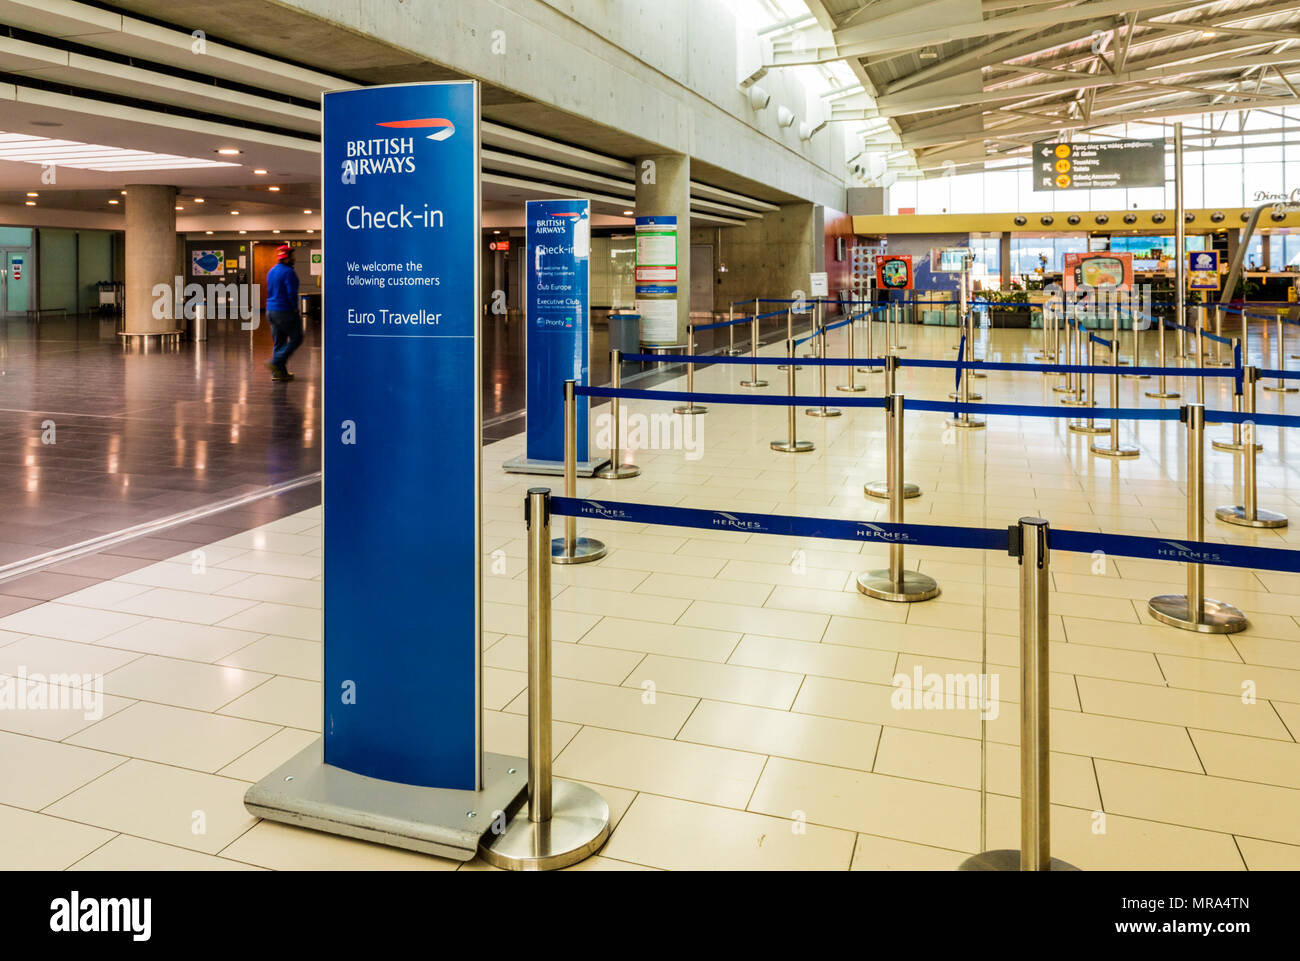 Larnaca, Cyprus. May 2018. A view of the  British airways check in area of the departures terminal  at Larnaca airport, Cyprus, Stock Photo